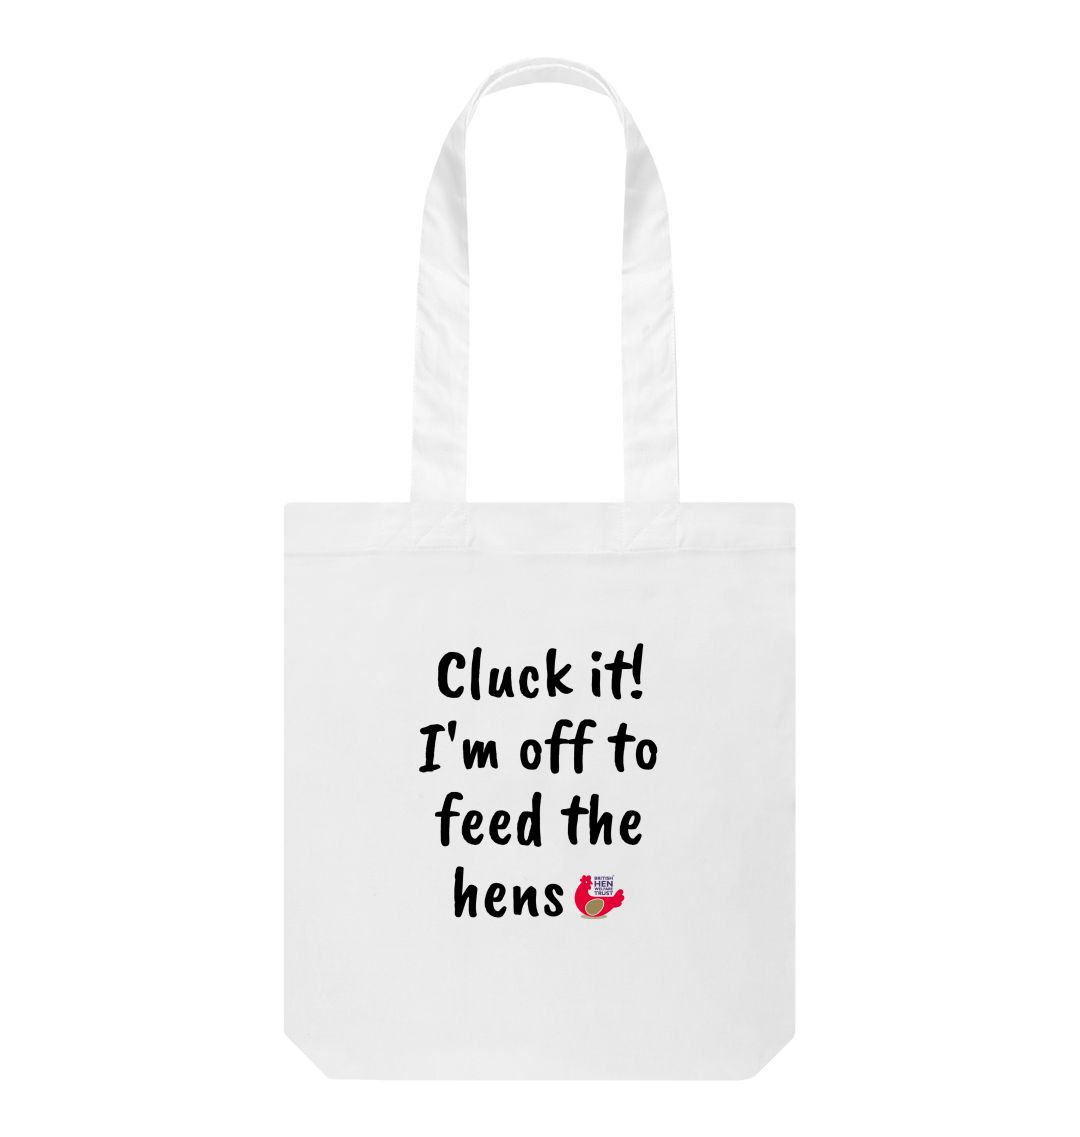 White Cluck it! I'm off to feed the hens Tote Bag